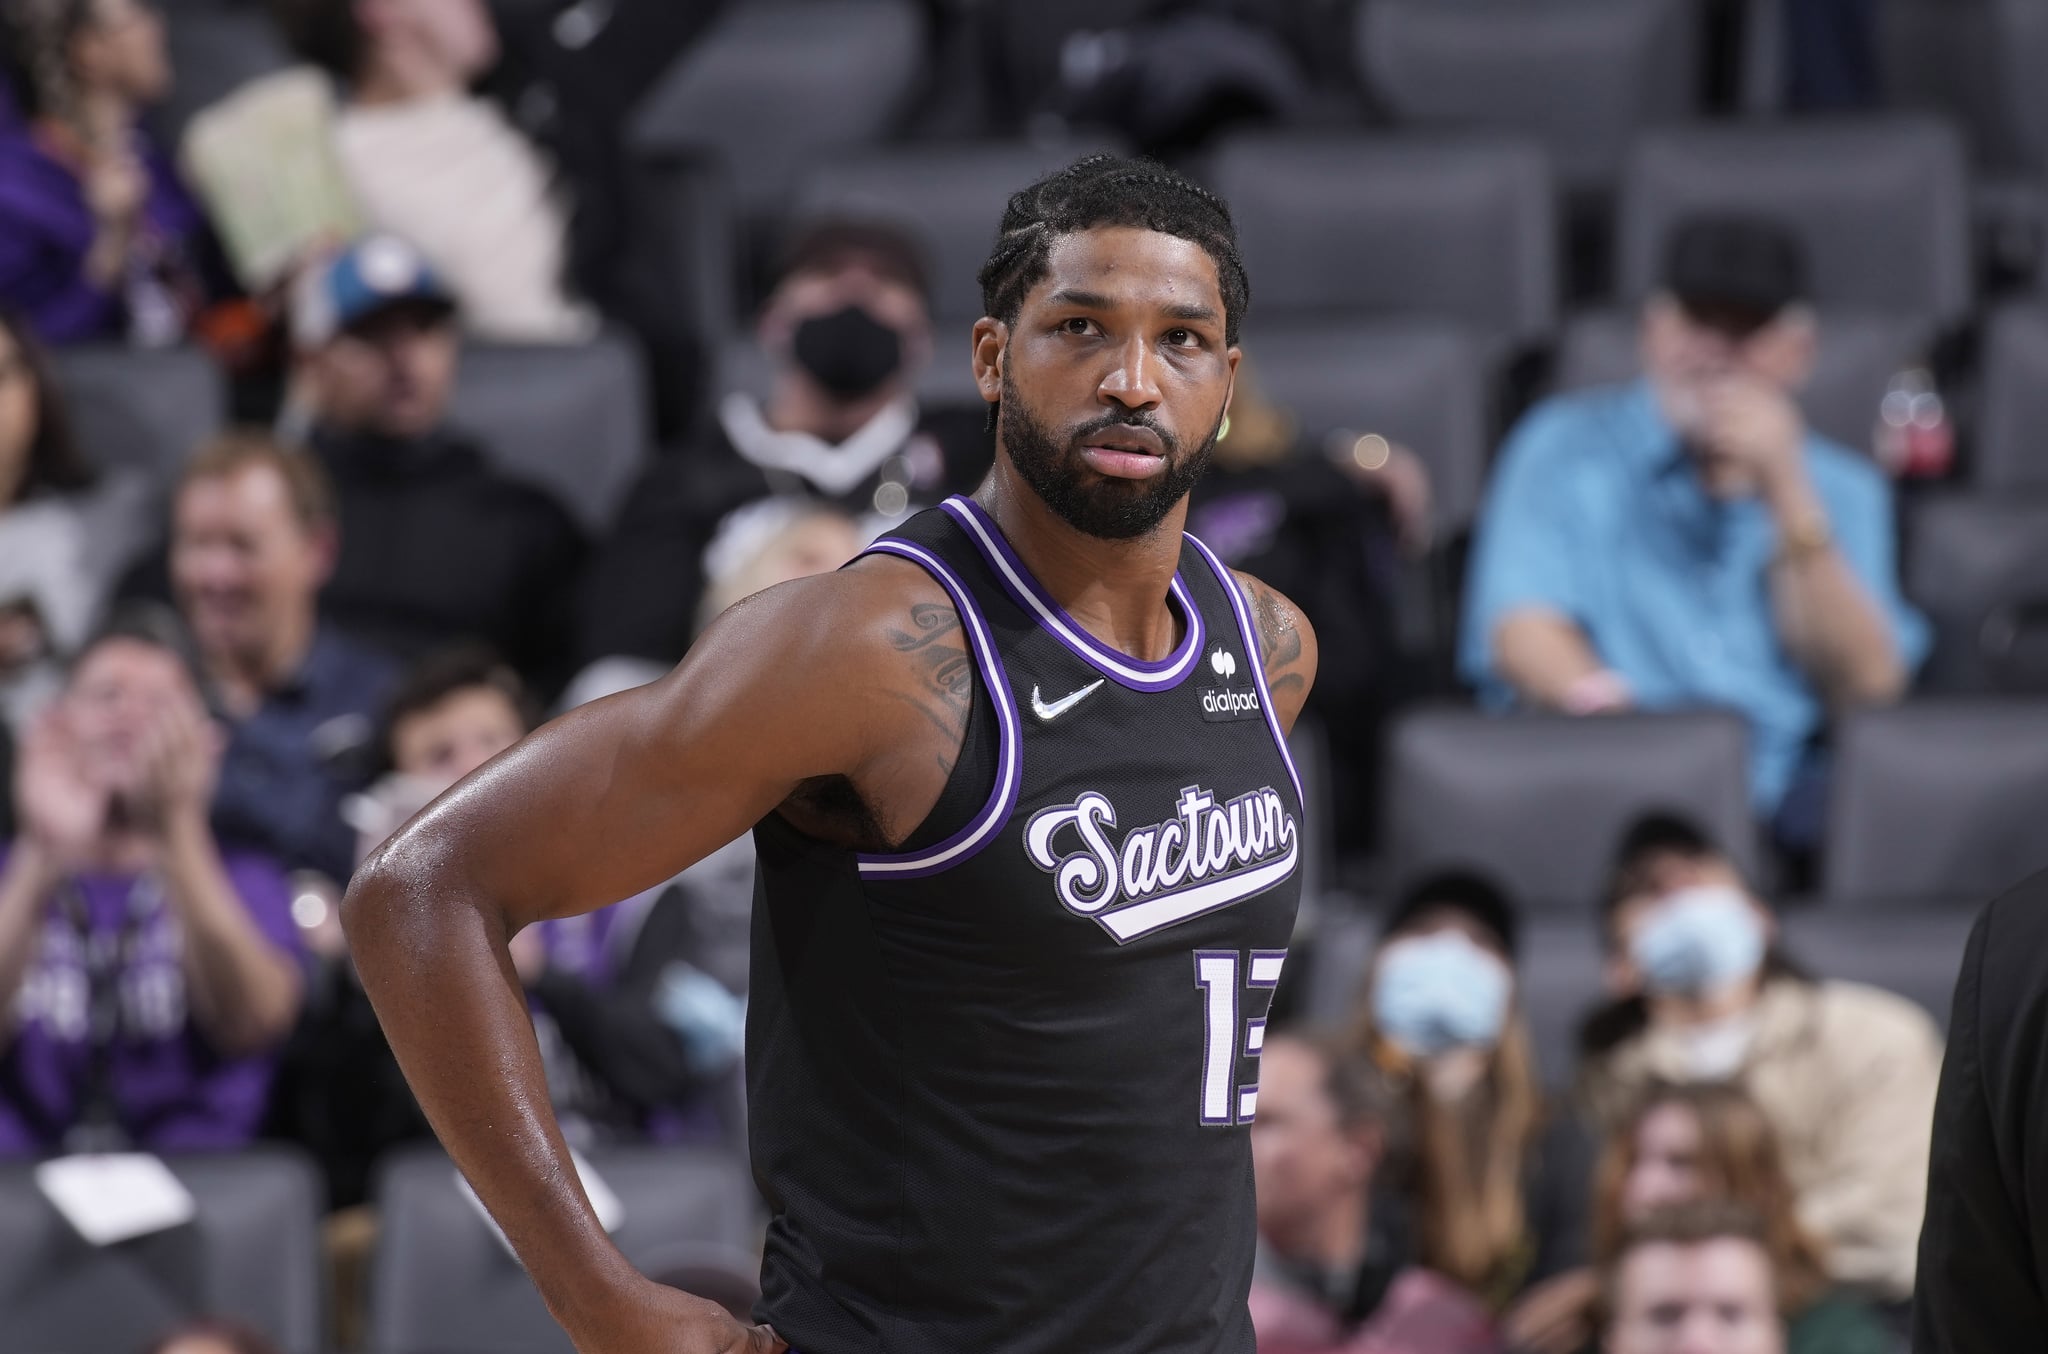 SACRAMENTO, CA - DECEMBER 17: Tristan Thompson #13 of the Sacramento Kings looks on during the game against the Memphis Grizzlies on December 17, 2021 at Golden 1 Centre in Sacramento, California. NOTE TO USER: User expressly acknowledges and agrees that, by downloading and or using this photograph, User is consenting to the terms and conditions of the Getty Images Agreement. Mandatory Copyright Notice: Copyright 2021 NBAE (Photo by Rocky Widner/NBAE via Getty Images)